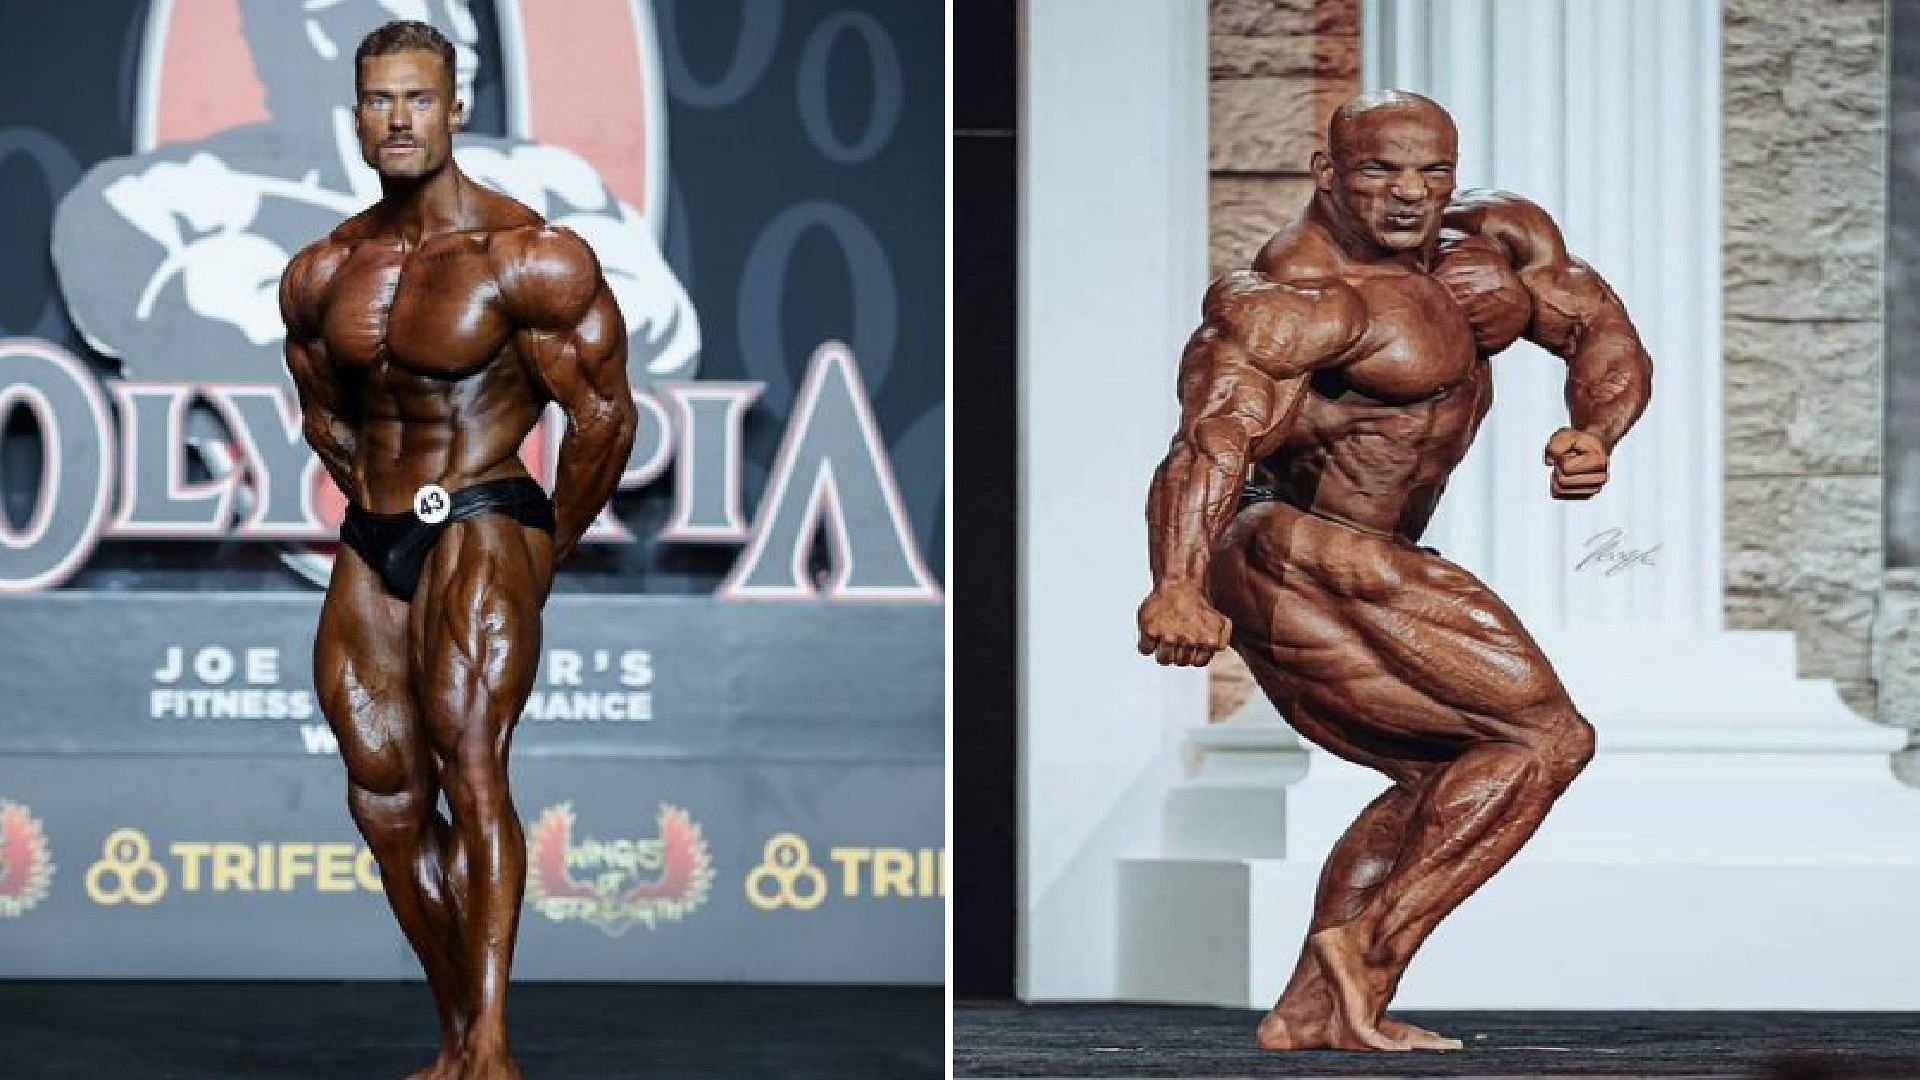   Classic Physique Olympia Chris Bumstead and Mr. Olympia Big Ramy